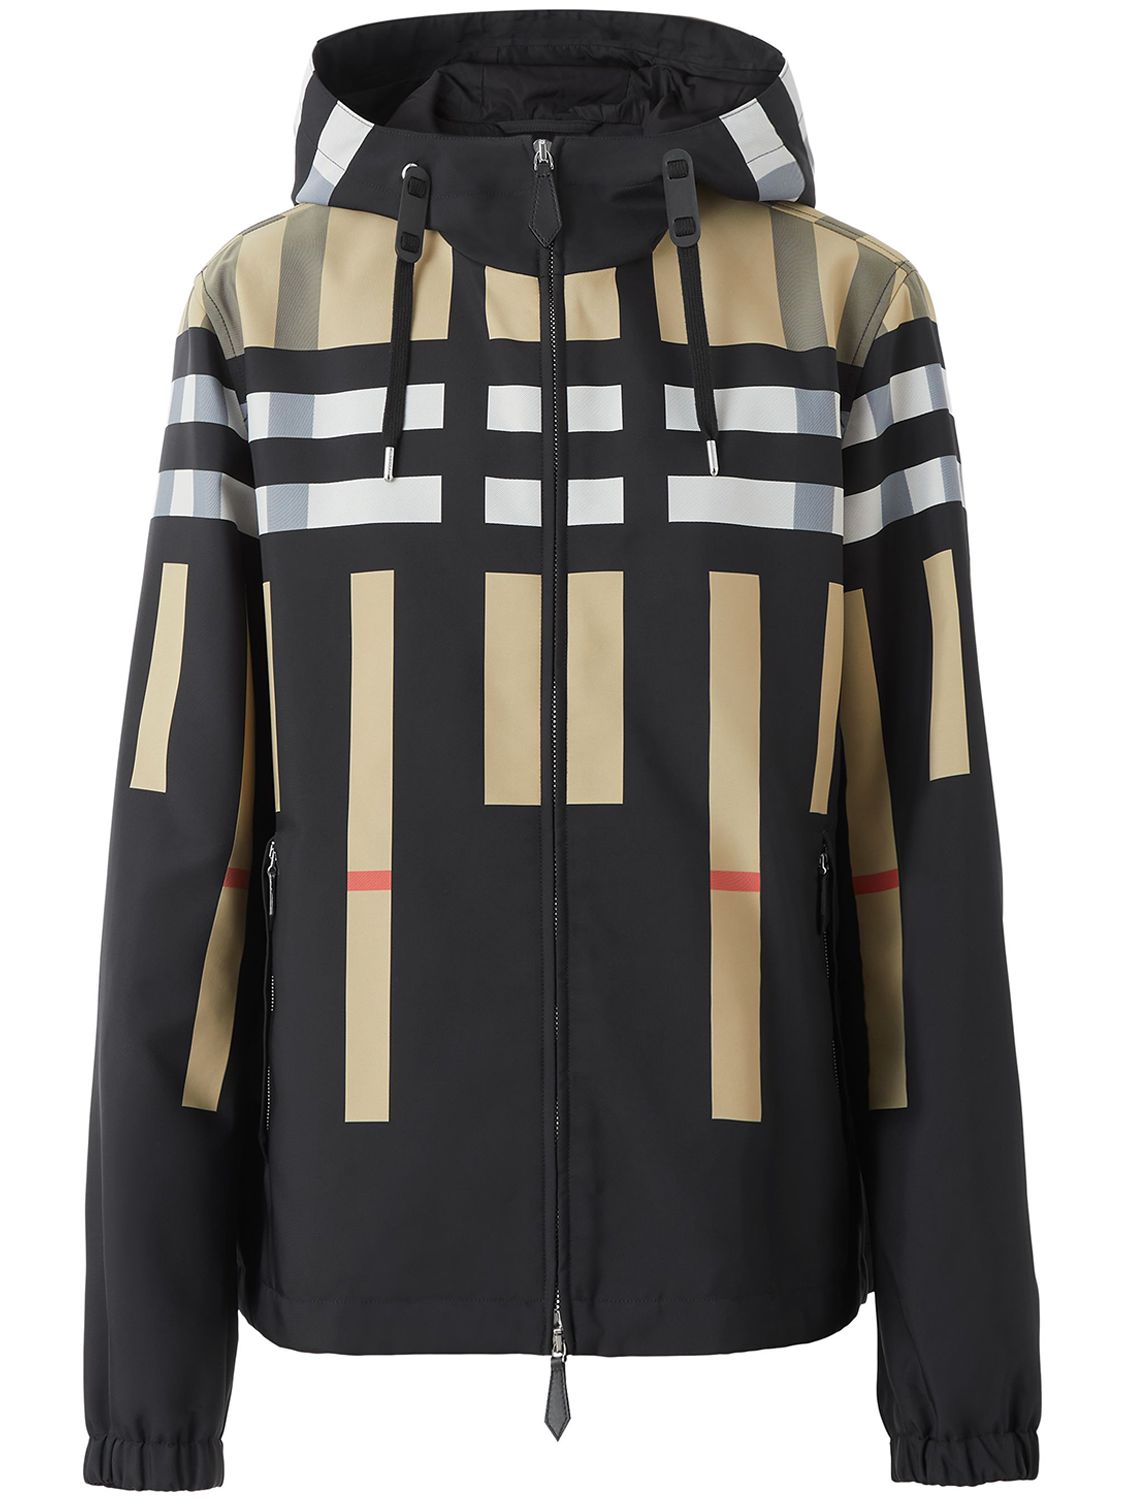 BURBERRY STANFORD CHECK ZIP JACKET